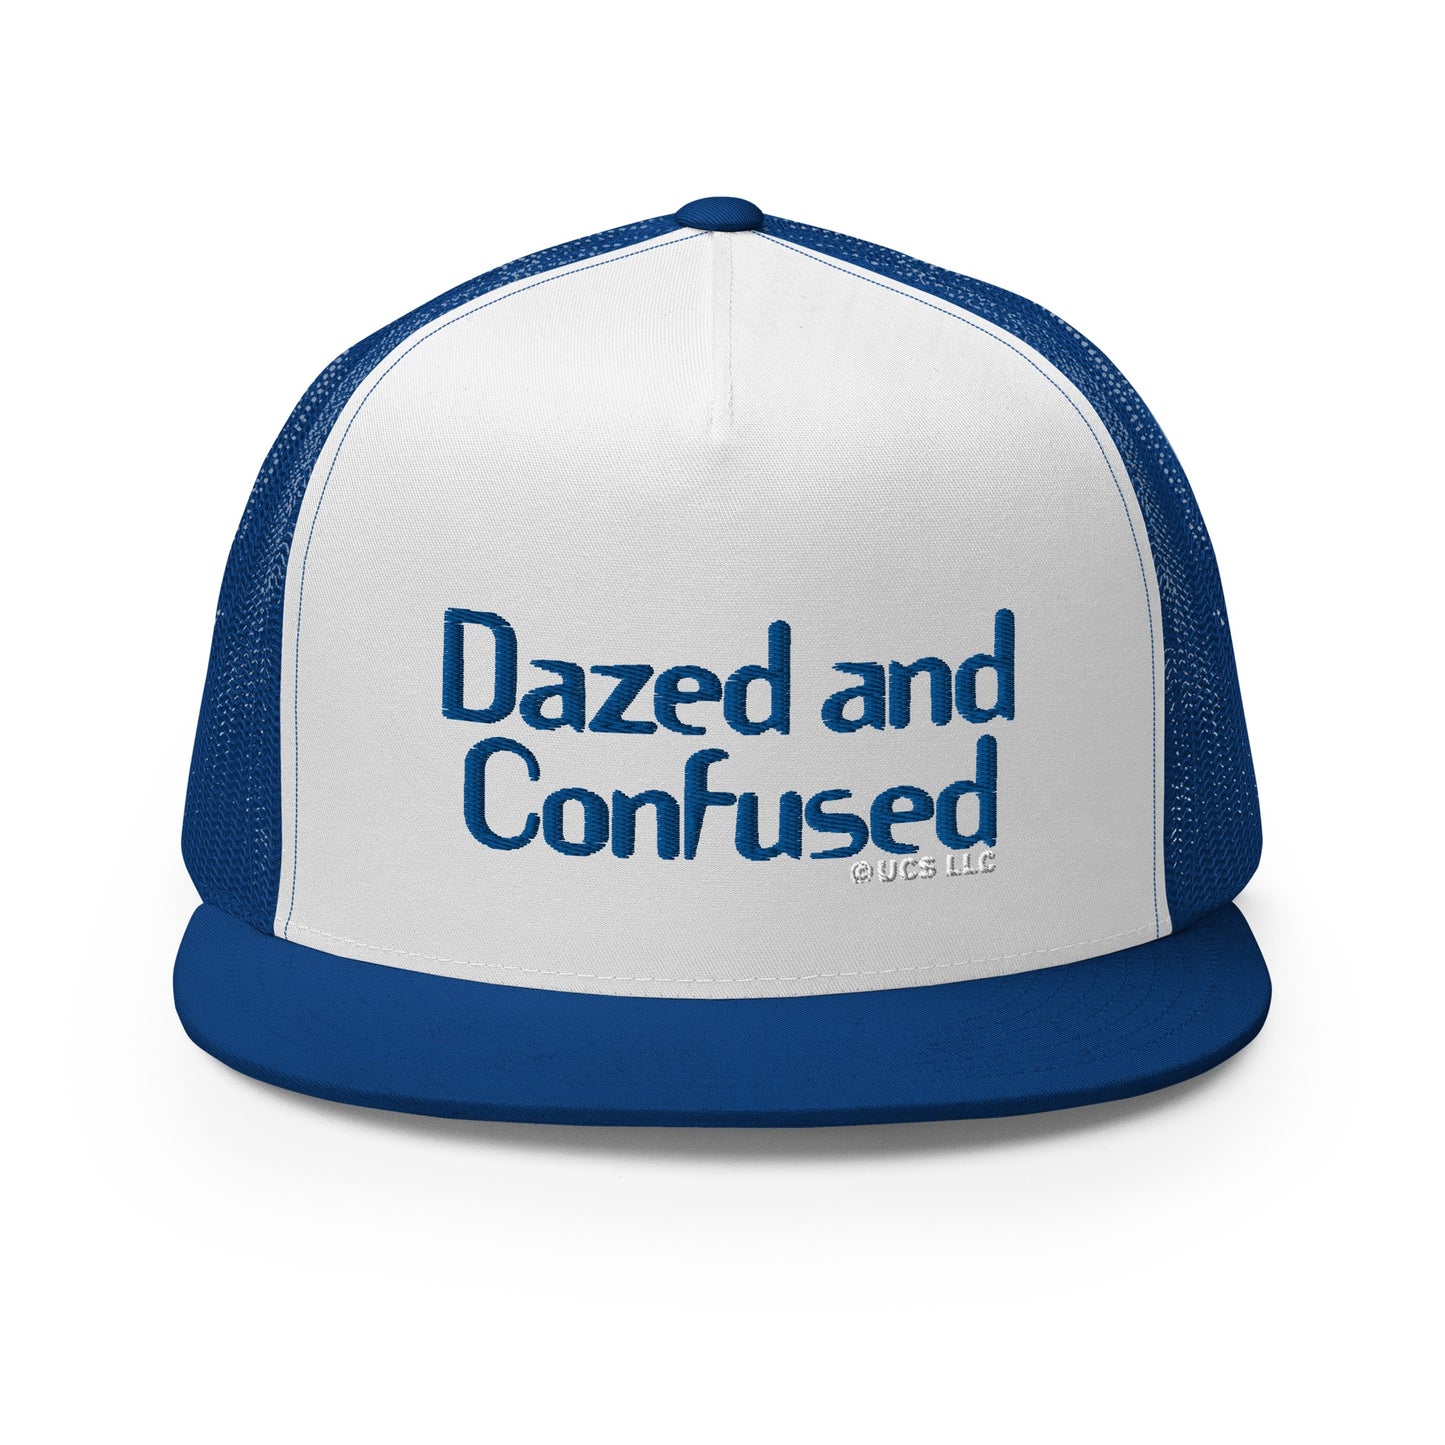 Dazed and Confused Logo 5 Panel Trucker Hat